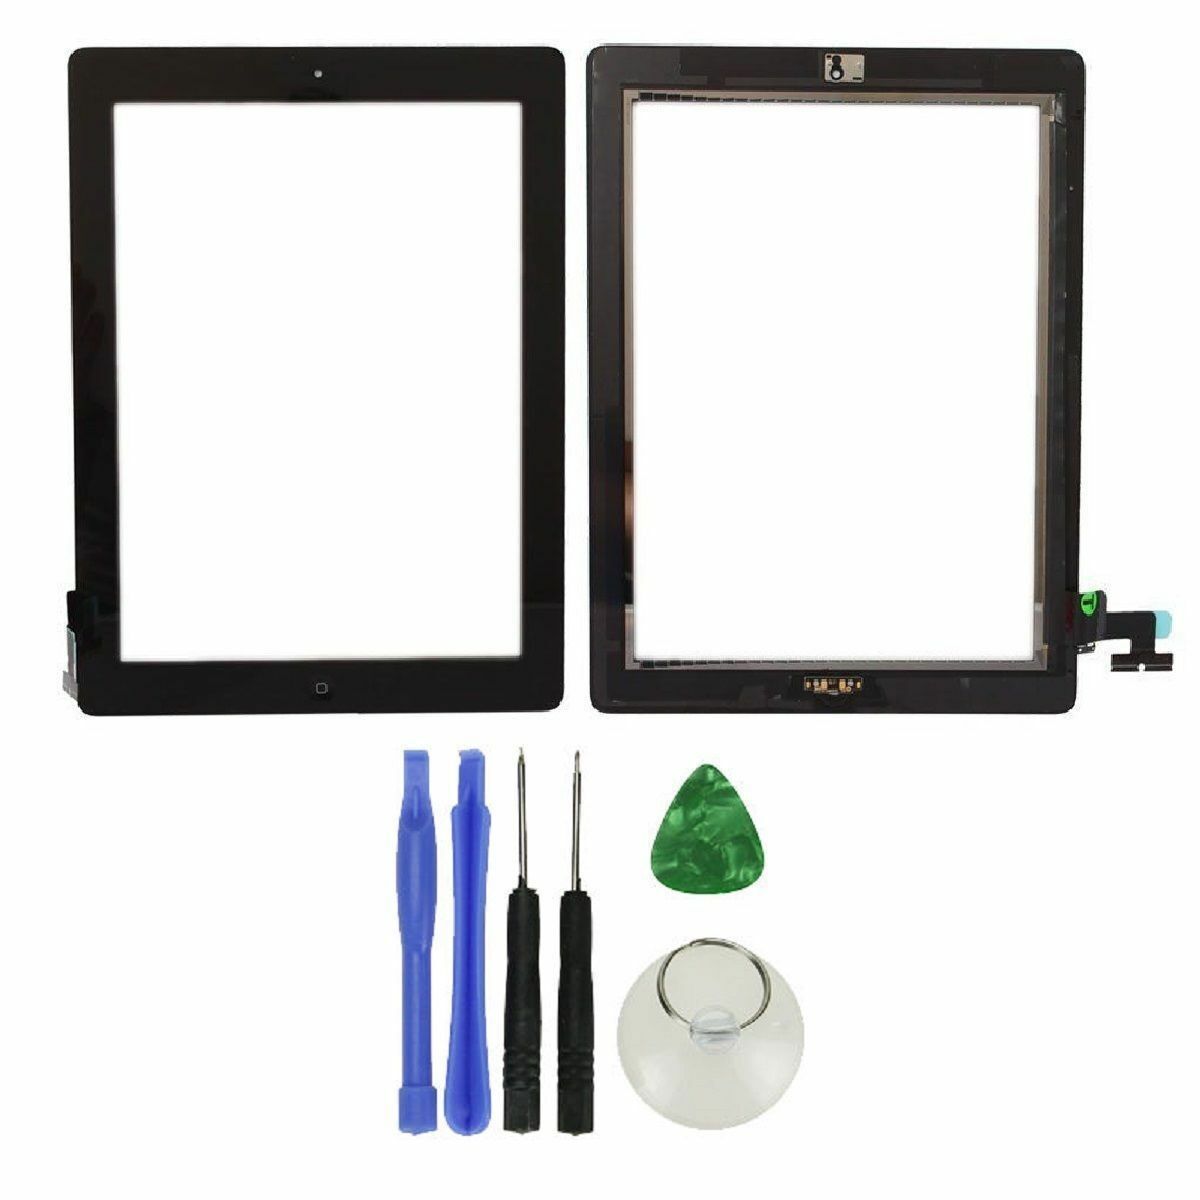 New Touch Screen Digitizer Replacement for iPad 1/2/3/4/5 Mini 1/2/3 AIR 1 TOOLS